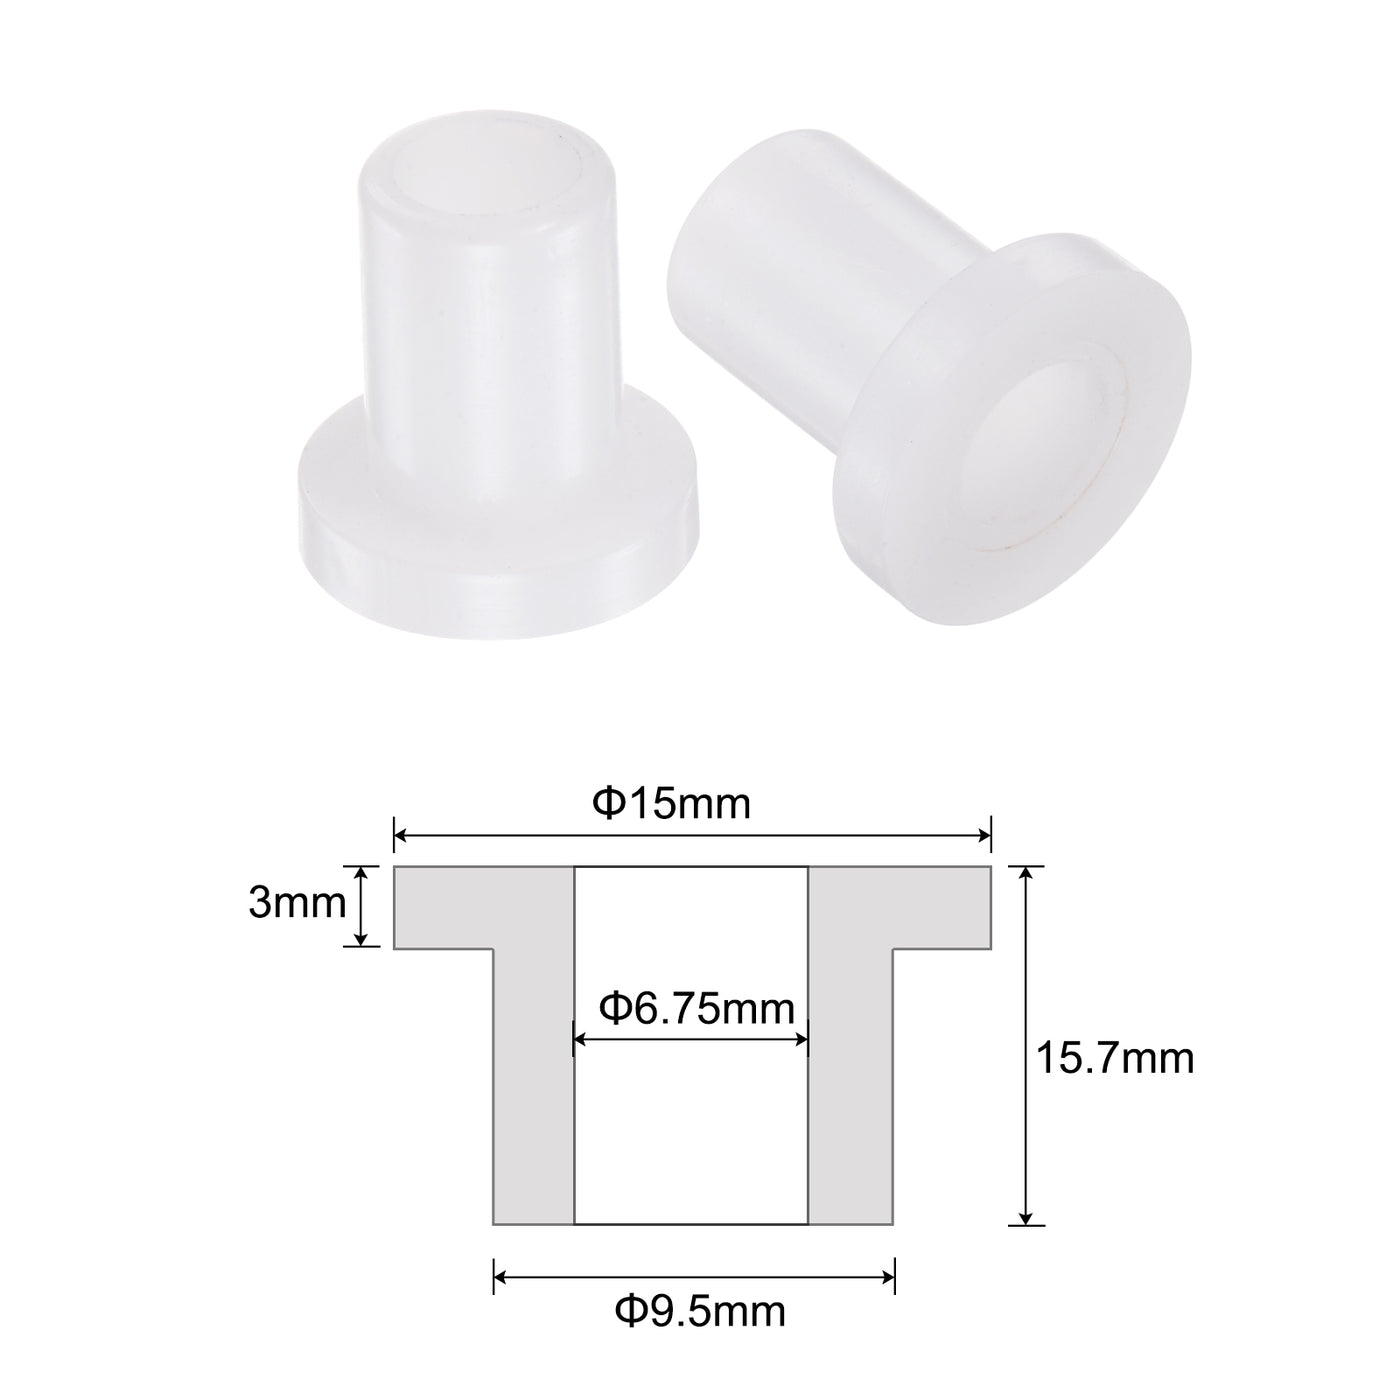 uxcell Uxcell 12pcs Flanged Sleeve Bearings 6.75mm ID 9.5mm OD 15.7mm L, Nylon Bushings, White